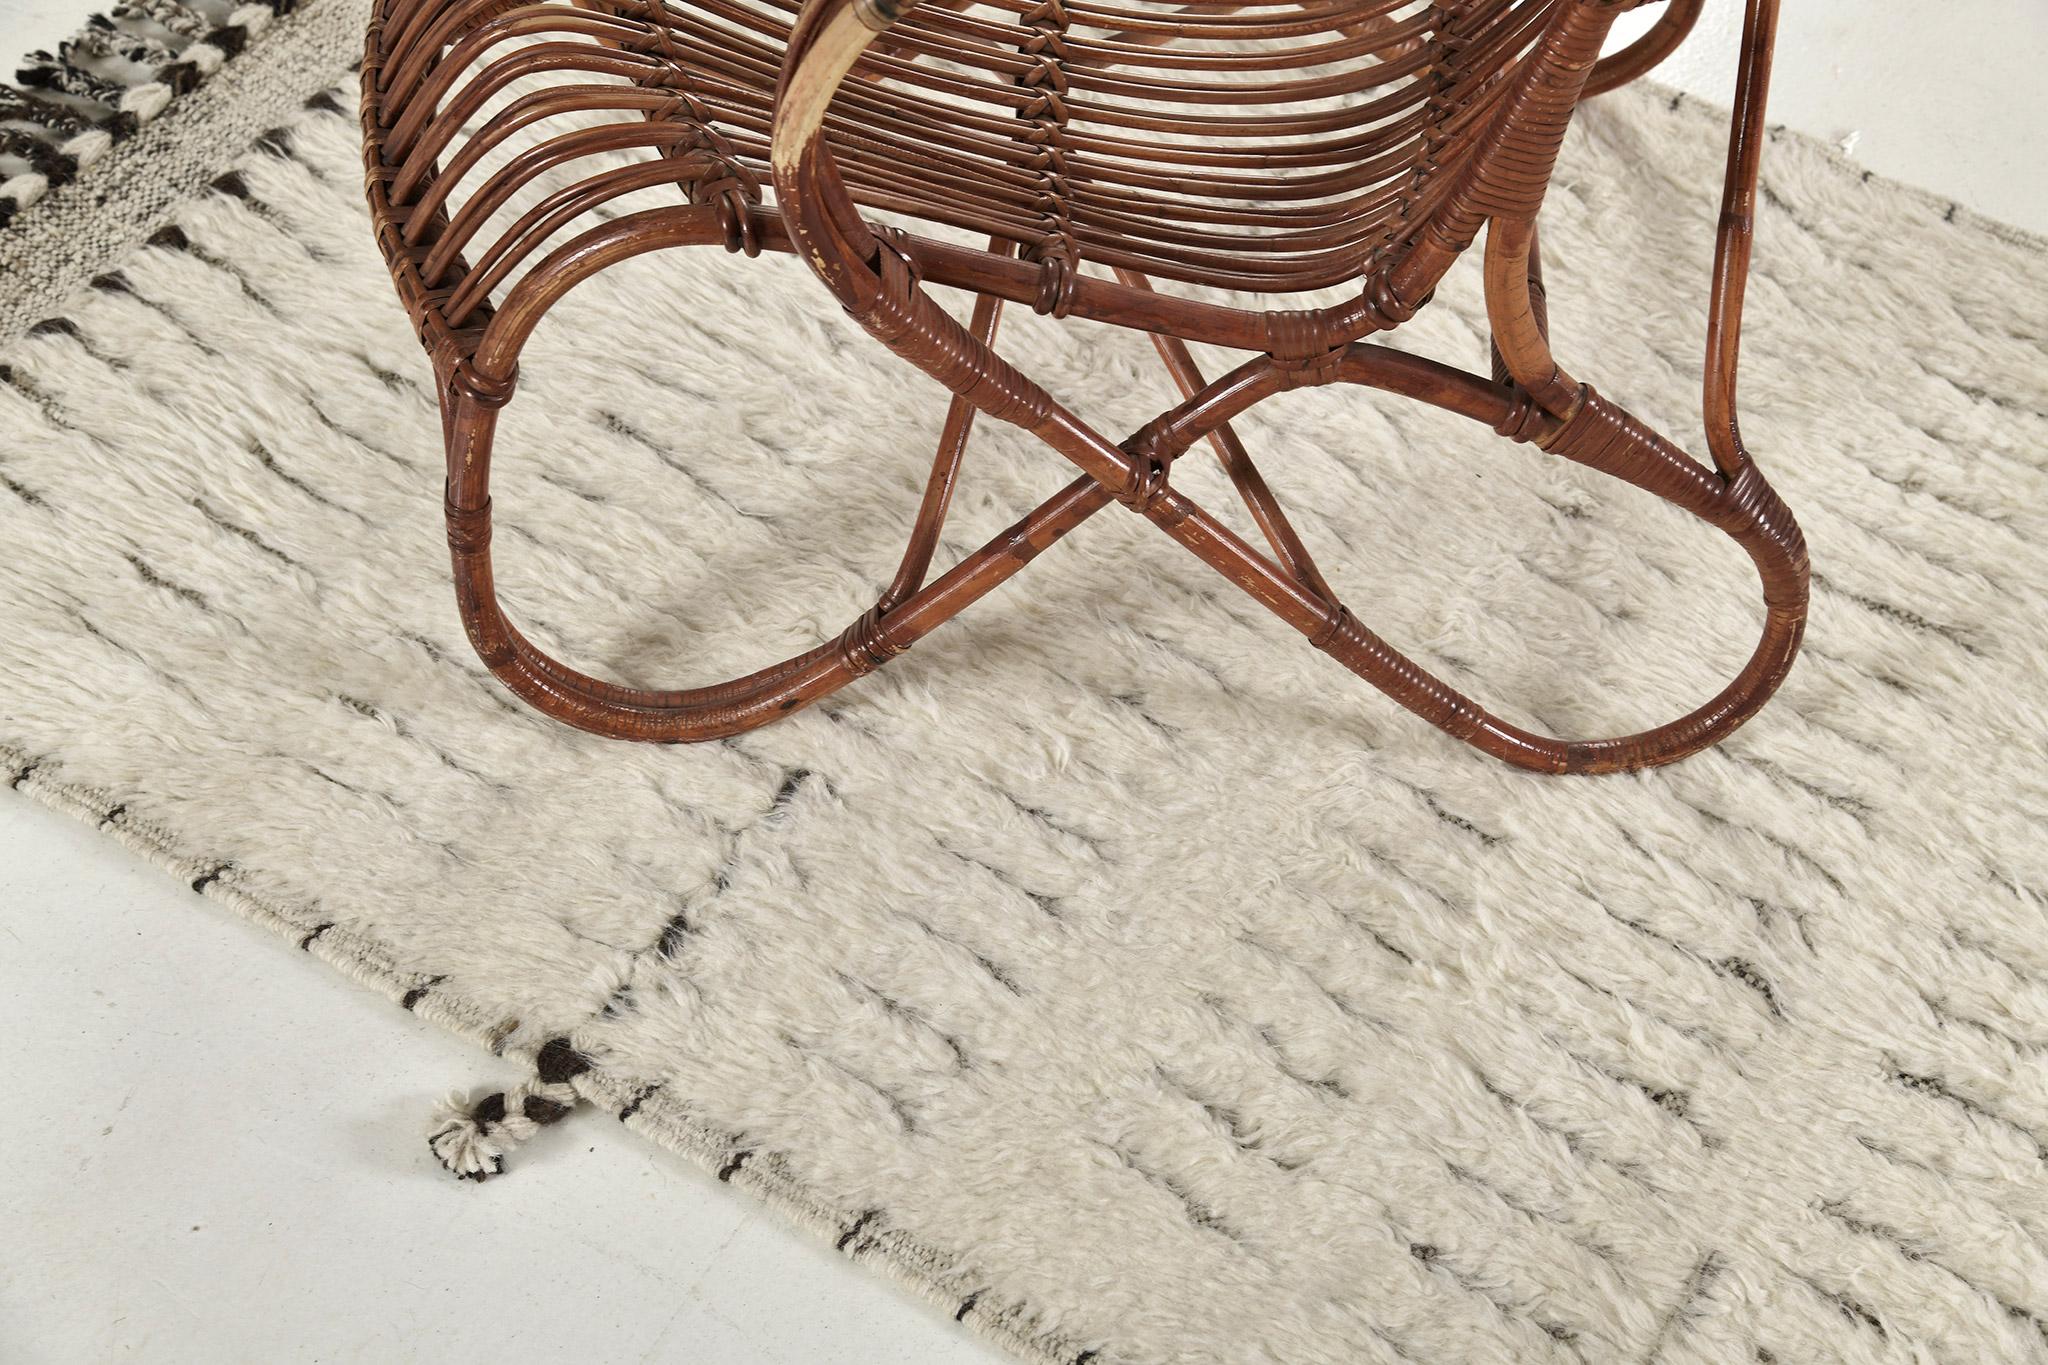 Barguzin is a handwoven impressive wool rug with timeless embossed patch detailing. In addition to its perfect ivory pile weave, Barguzin has an elegant shag that nourishes a lustrous texture and contemporary feel to one's space. The Haute Bohemian